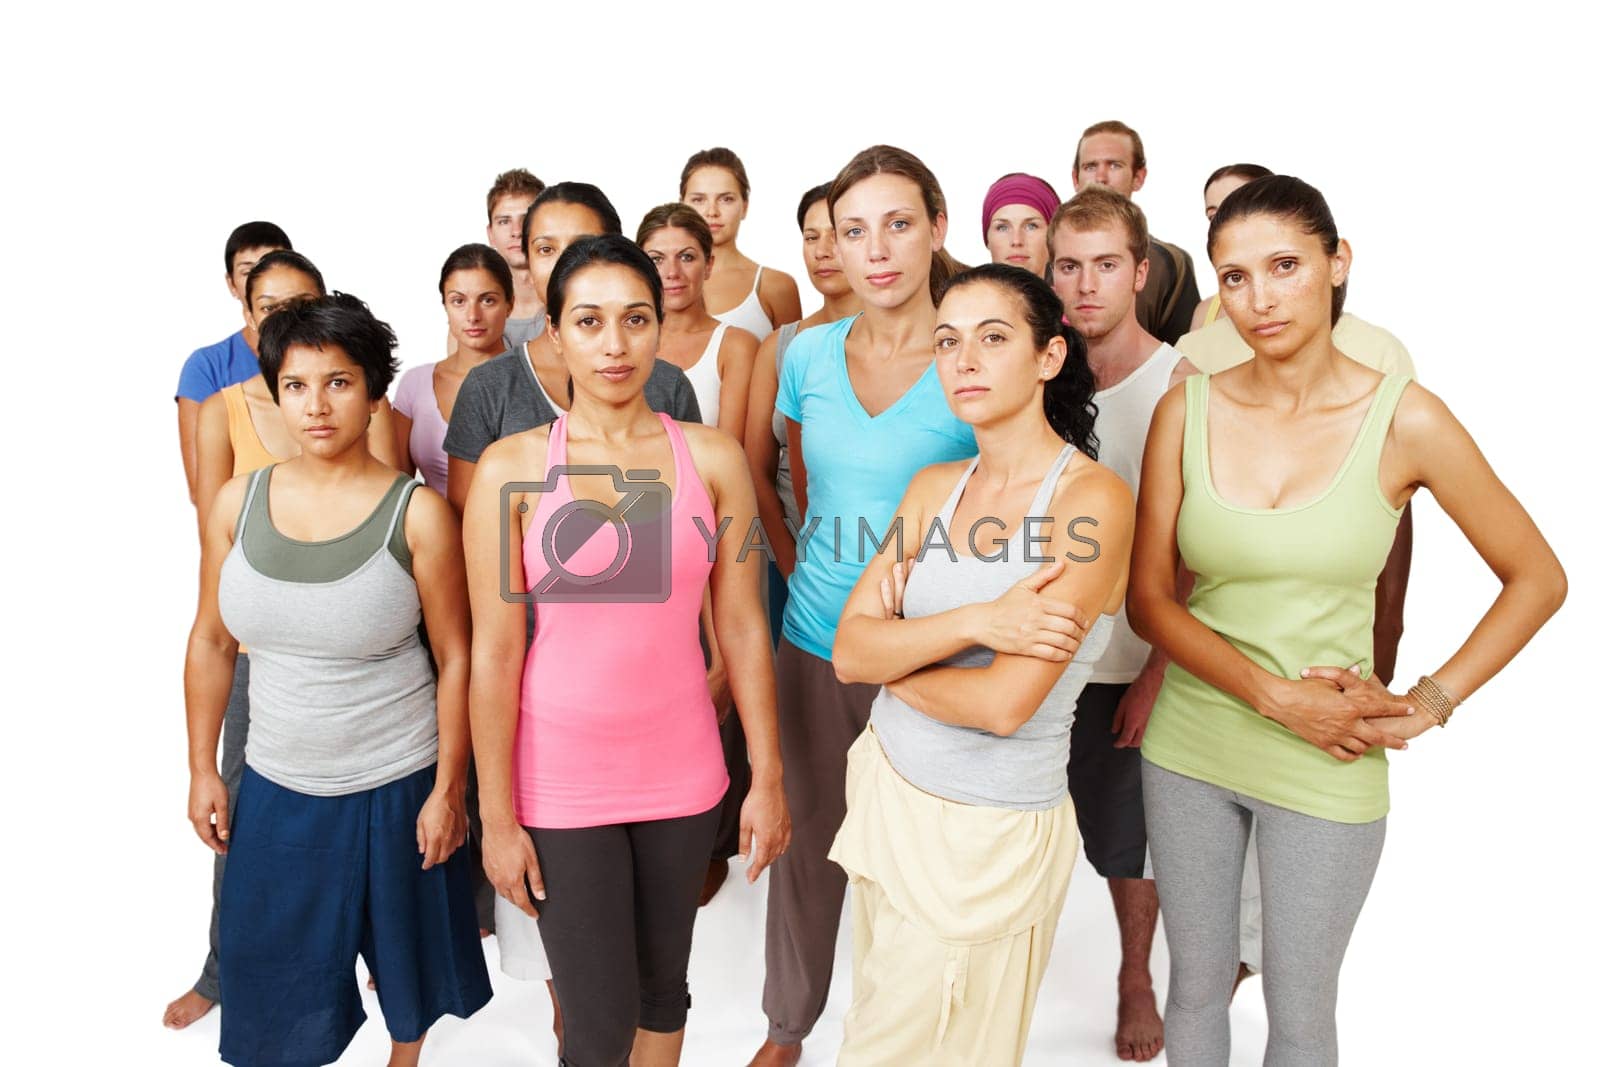 Royalty free image of Theyre serious about yoga fitness. A serious and focused yoga class standing together on a white background. by YuriArcurs